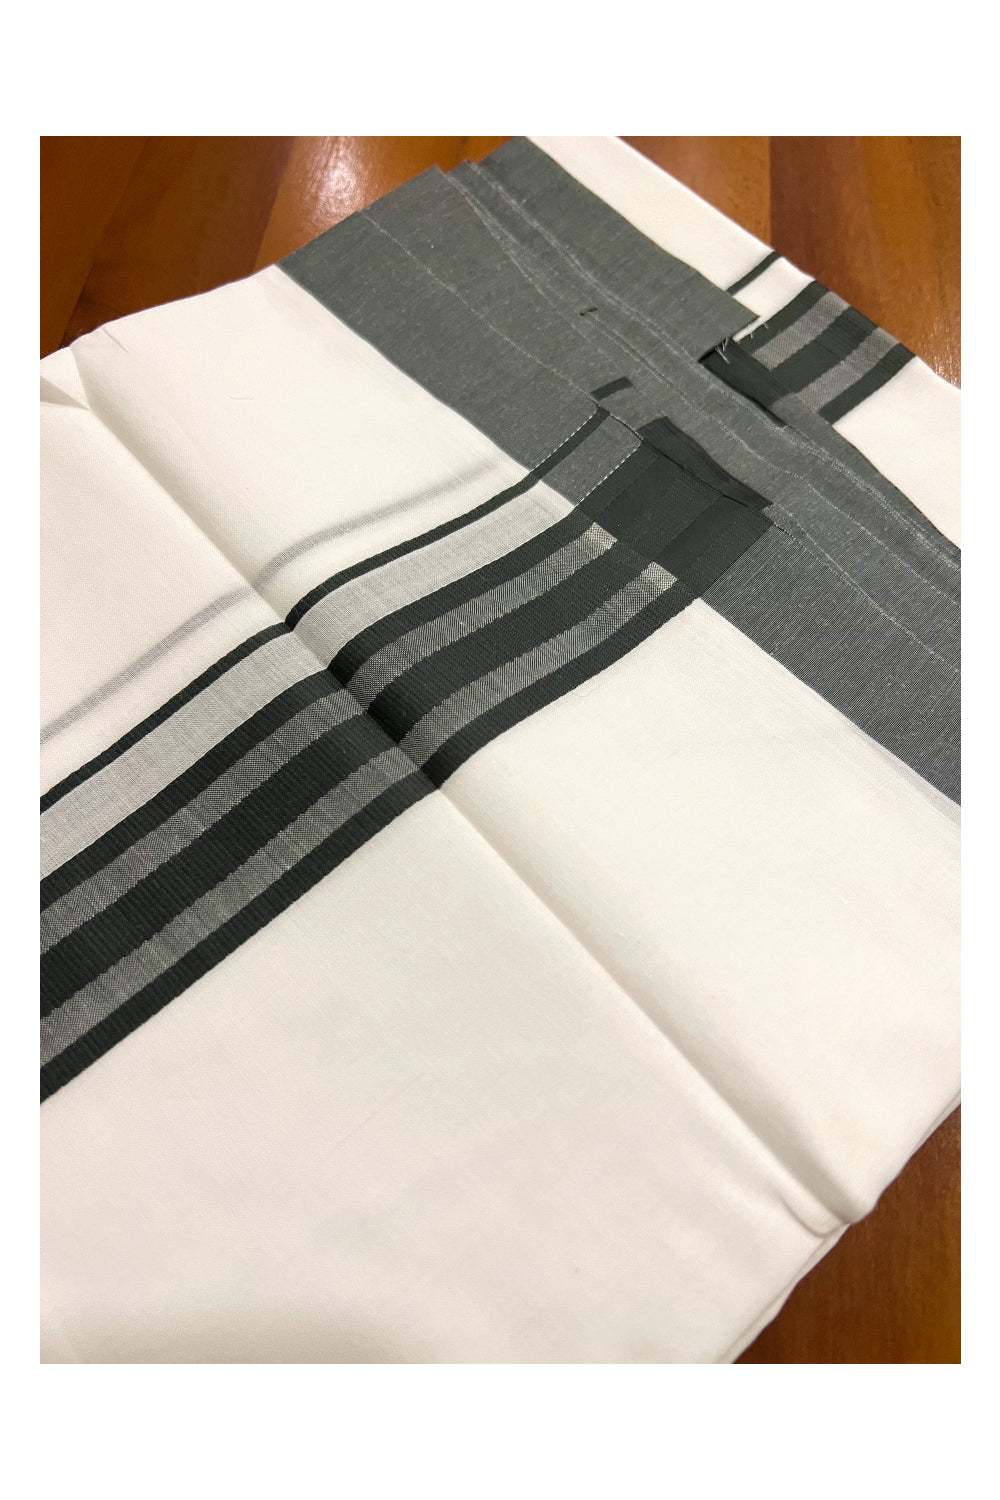 Pure White Cotton Double Mundu with Greenish Grey Line Border (South Indian Dhoti)